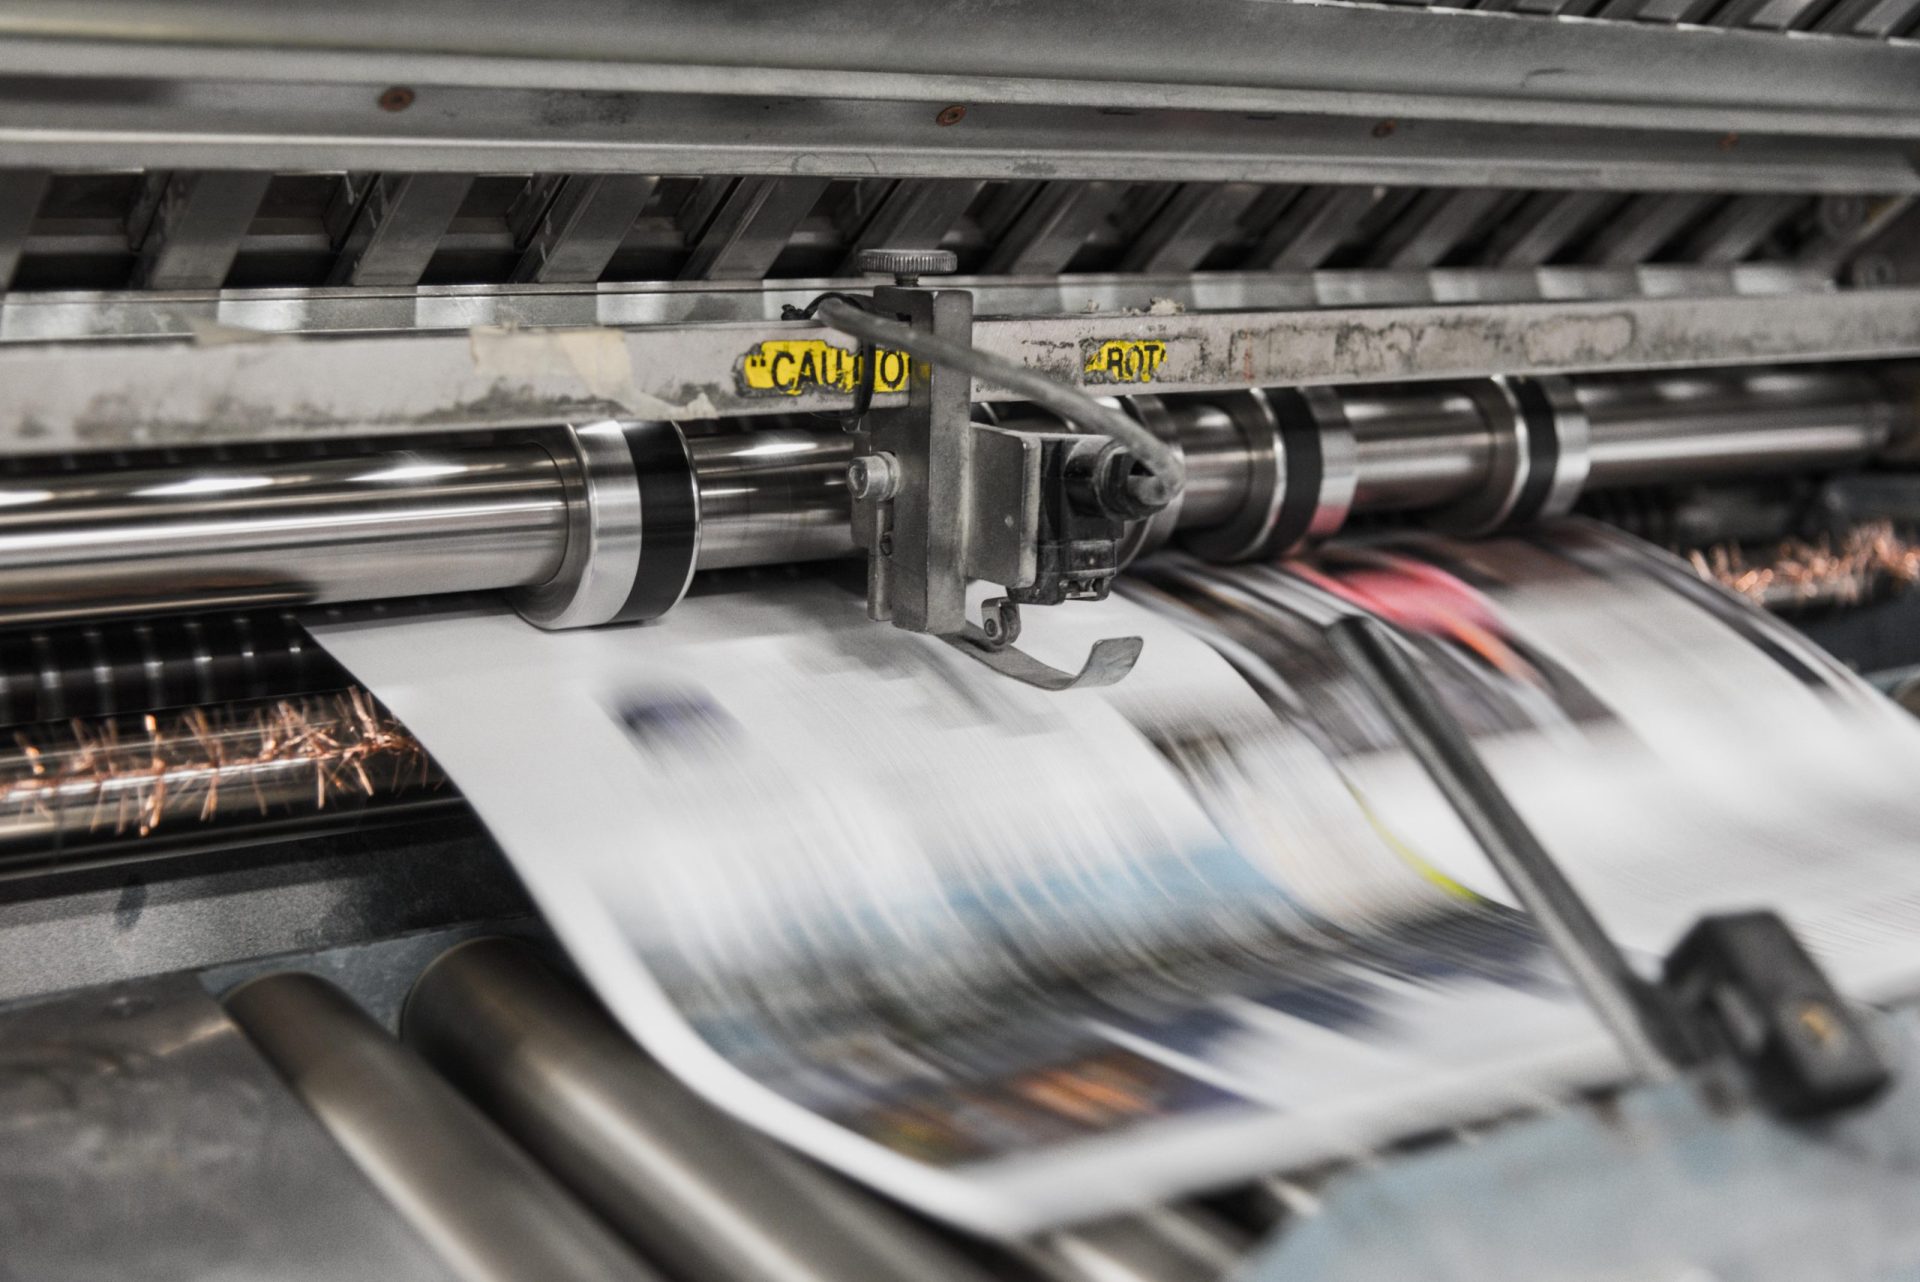 Copies of newspaper coming out of printing press